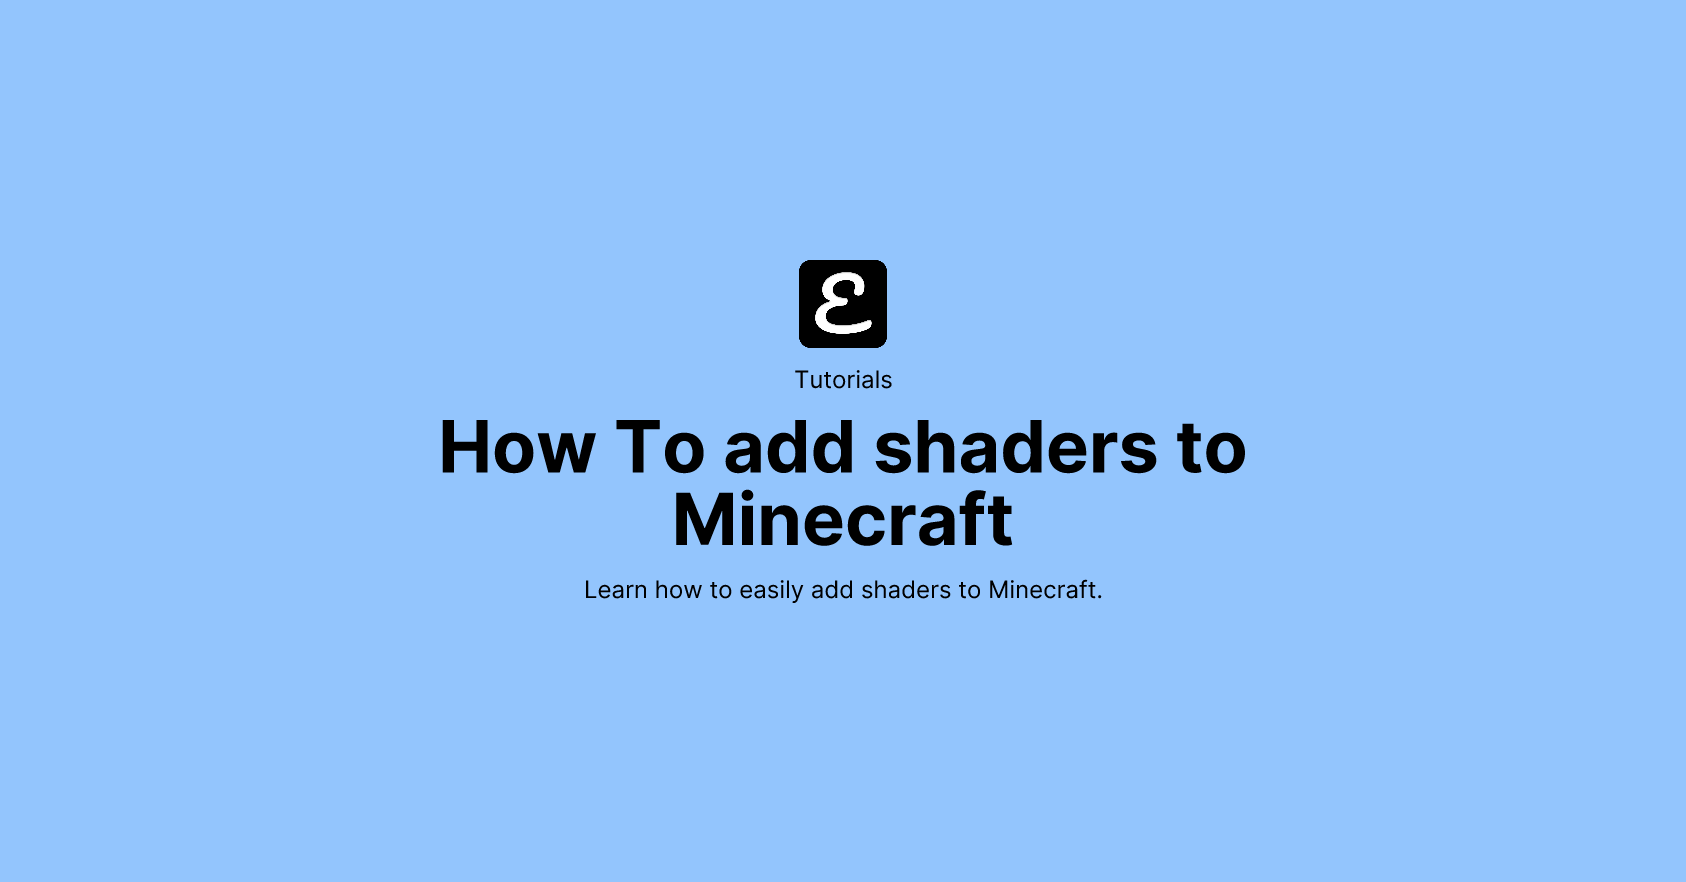 How To add shaders to Minecraft by Eric David Smith